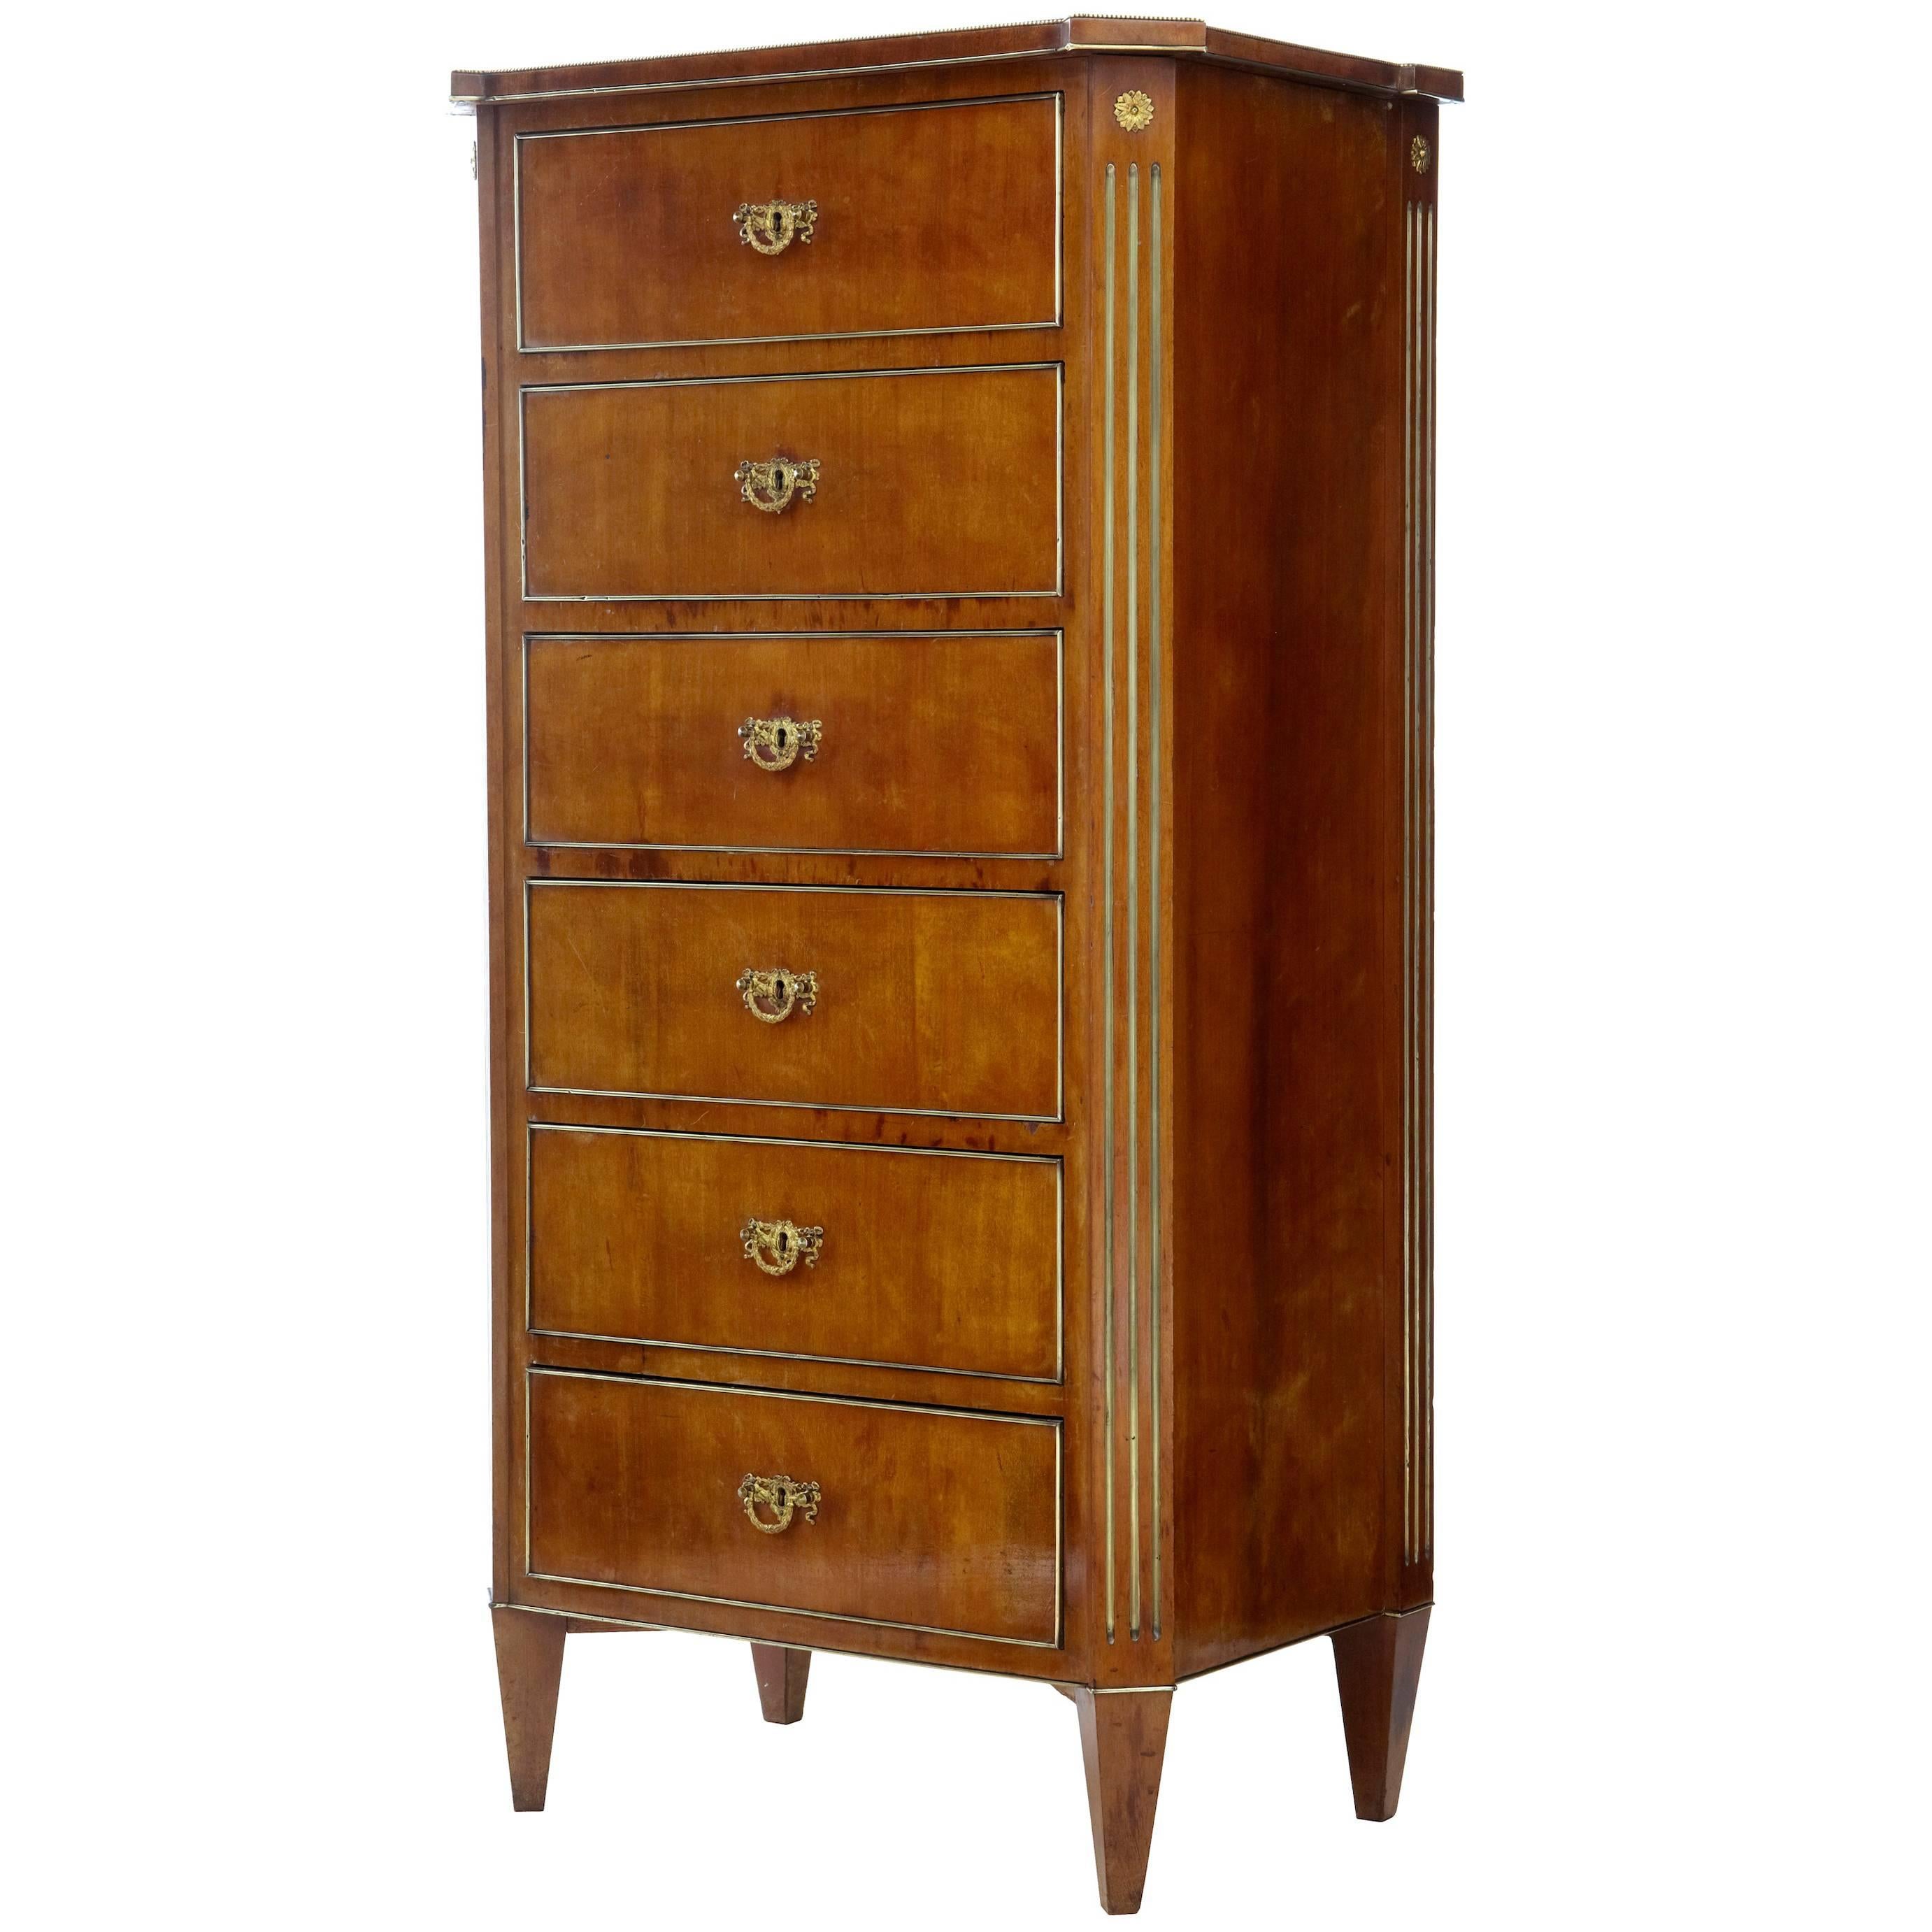 Late 19th Century Mahogany and Brass Tallboy Chest of Drawers